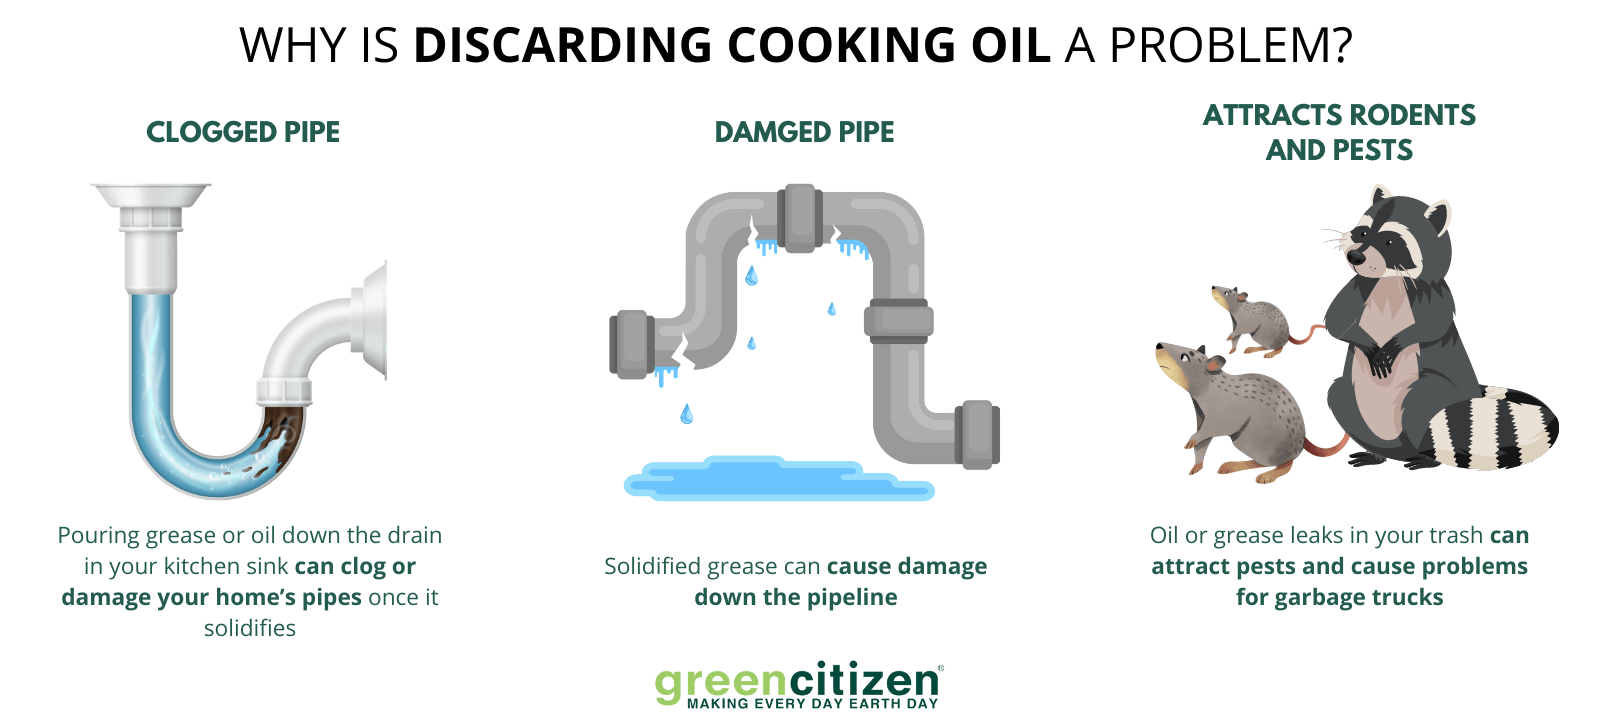 Discarding Cooking Oil Issues